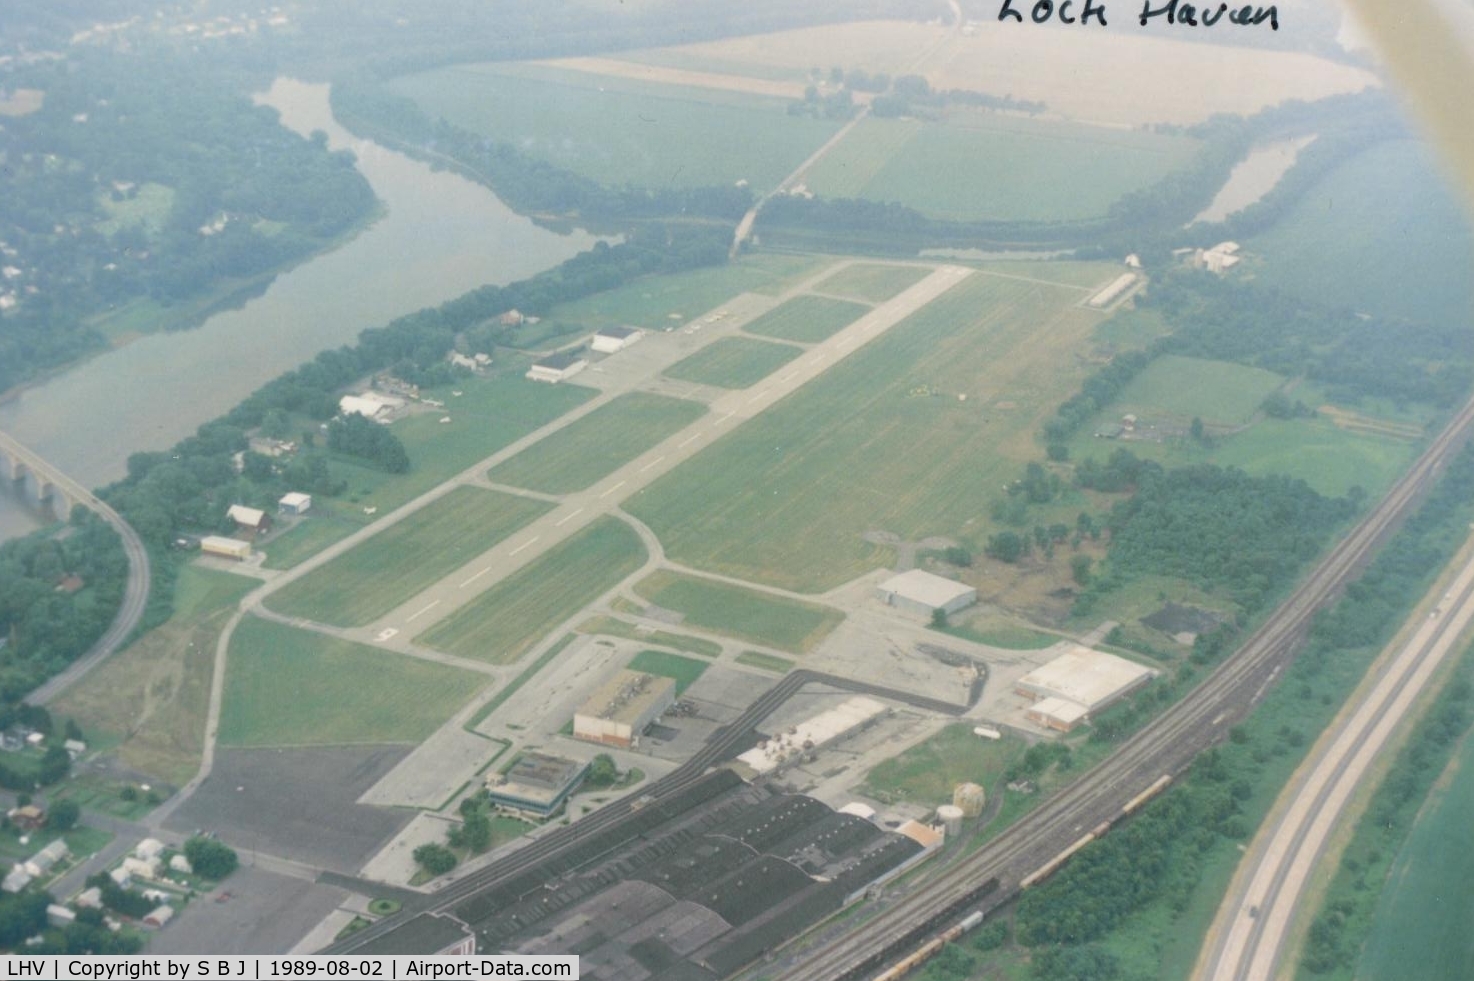 William T. Piper Memorial Airport (LHV) - Taken in 1989 when I made my only trip there. My dad was there to pick up a new J5A in 1940.